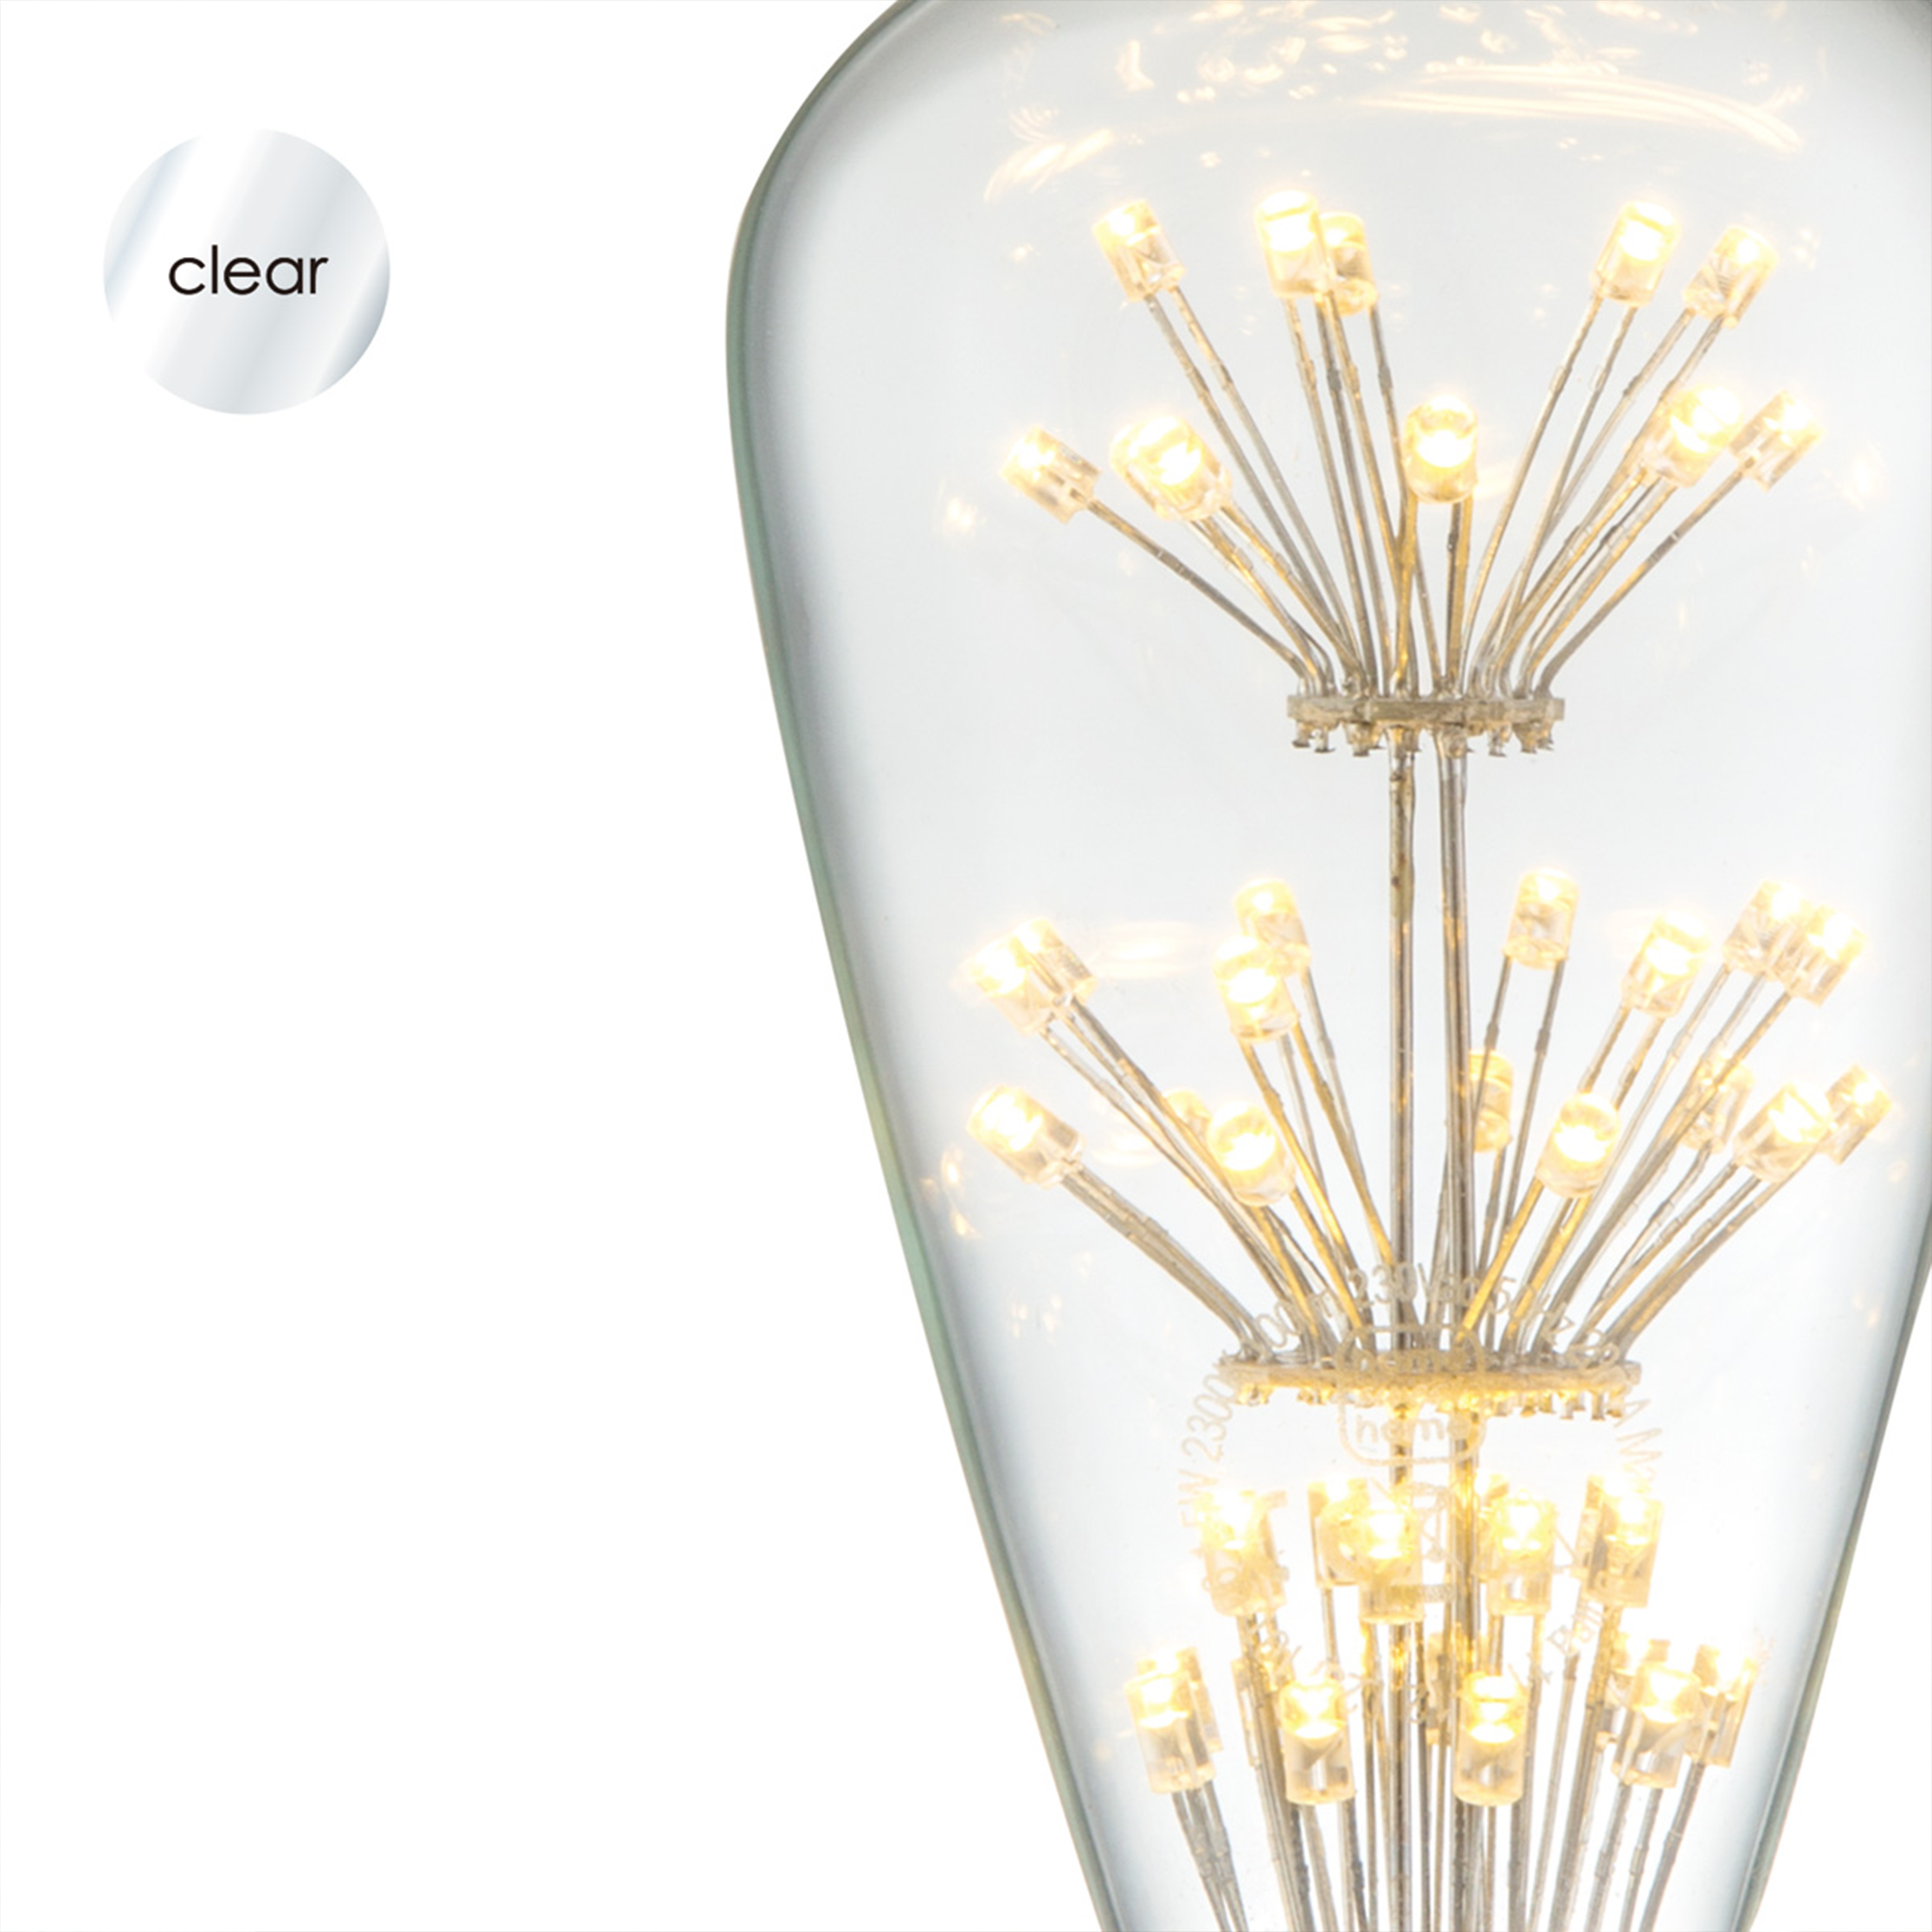 LED-Leuchtmittel 'Crystal' klar E27 1W 100 lm dimmbar + product picture